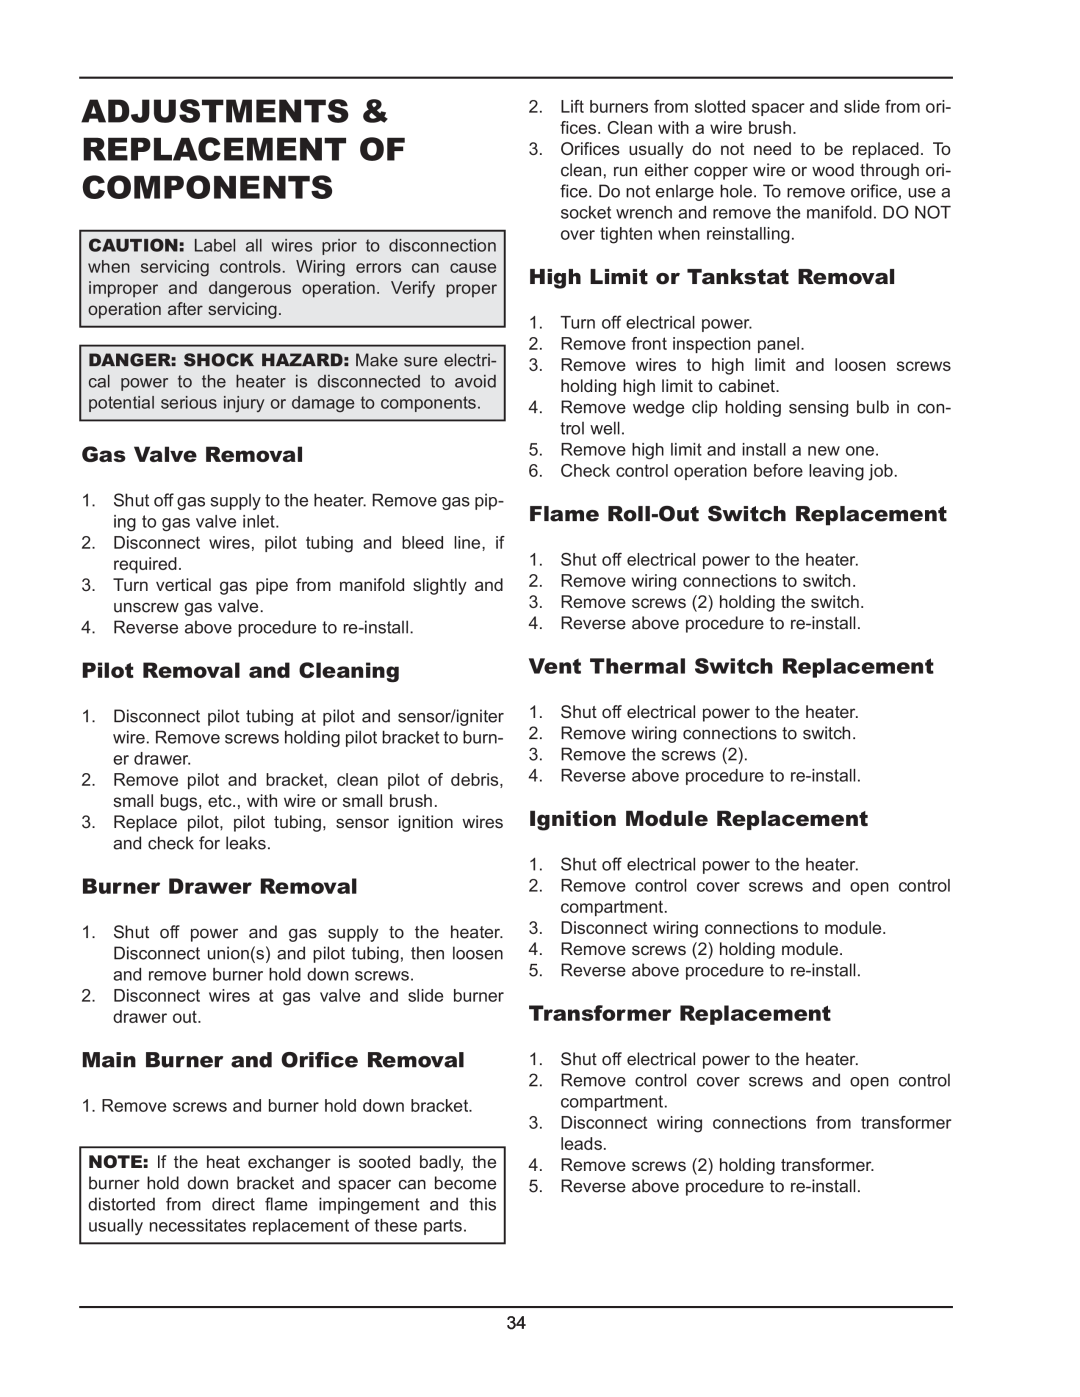 Raypak 2600401 Adjustments & Replacement Of Components, Pilot Removal and Cleaning, Main Burner and Orifice Removal 